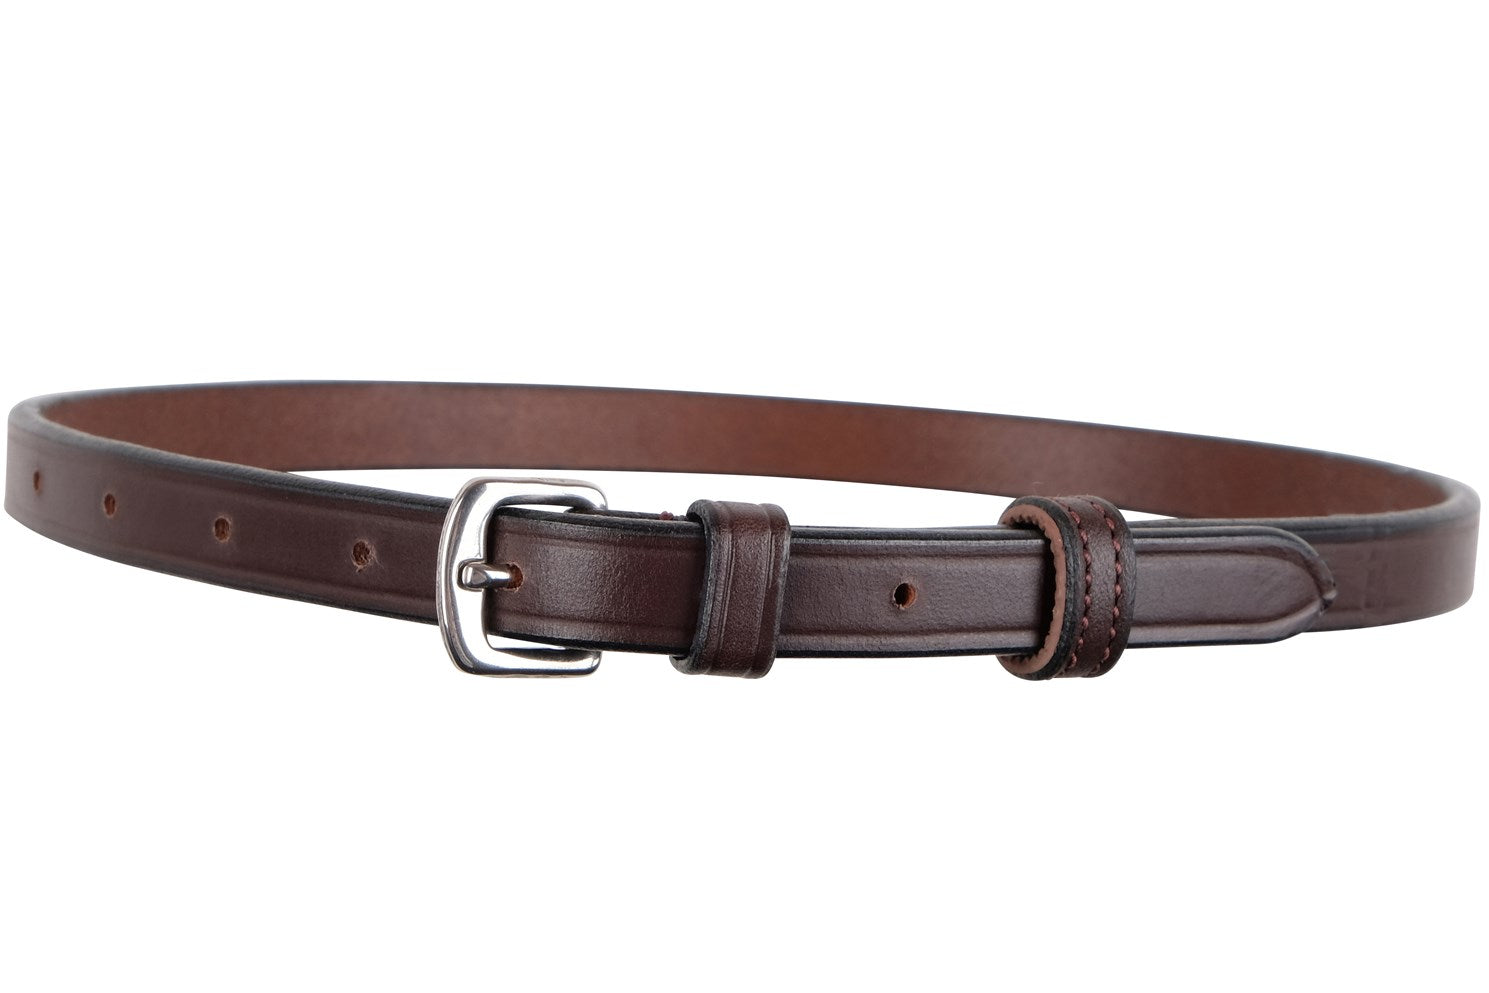 Flash strap in brown leather